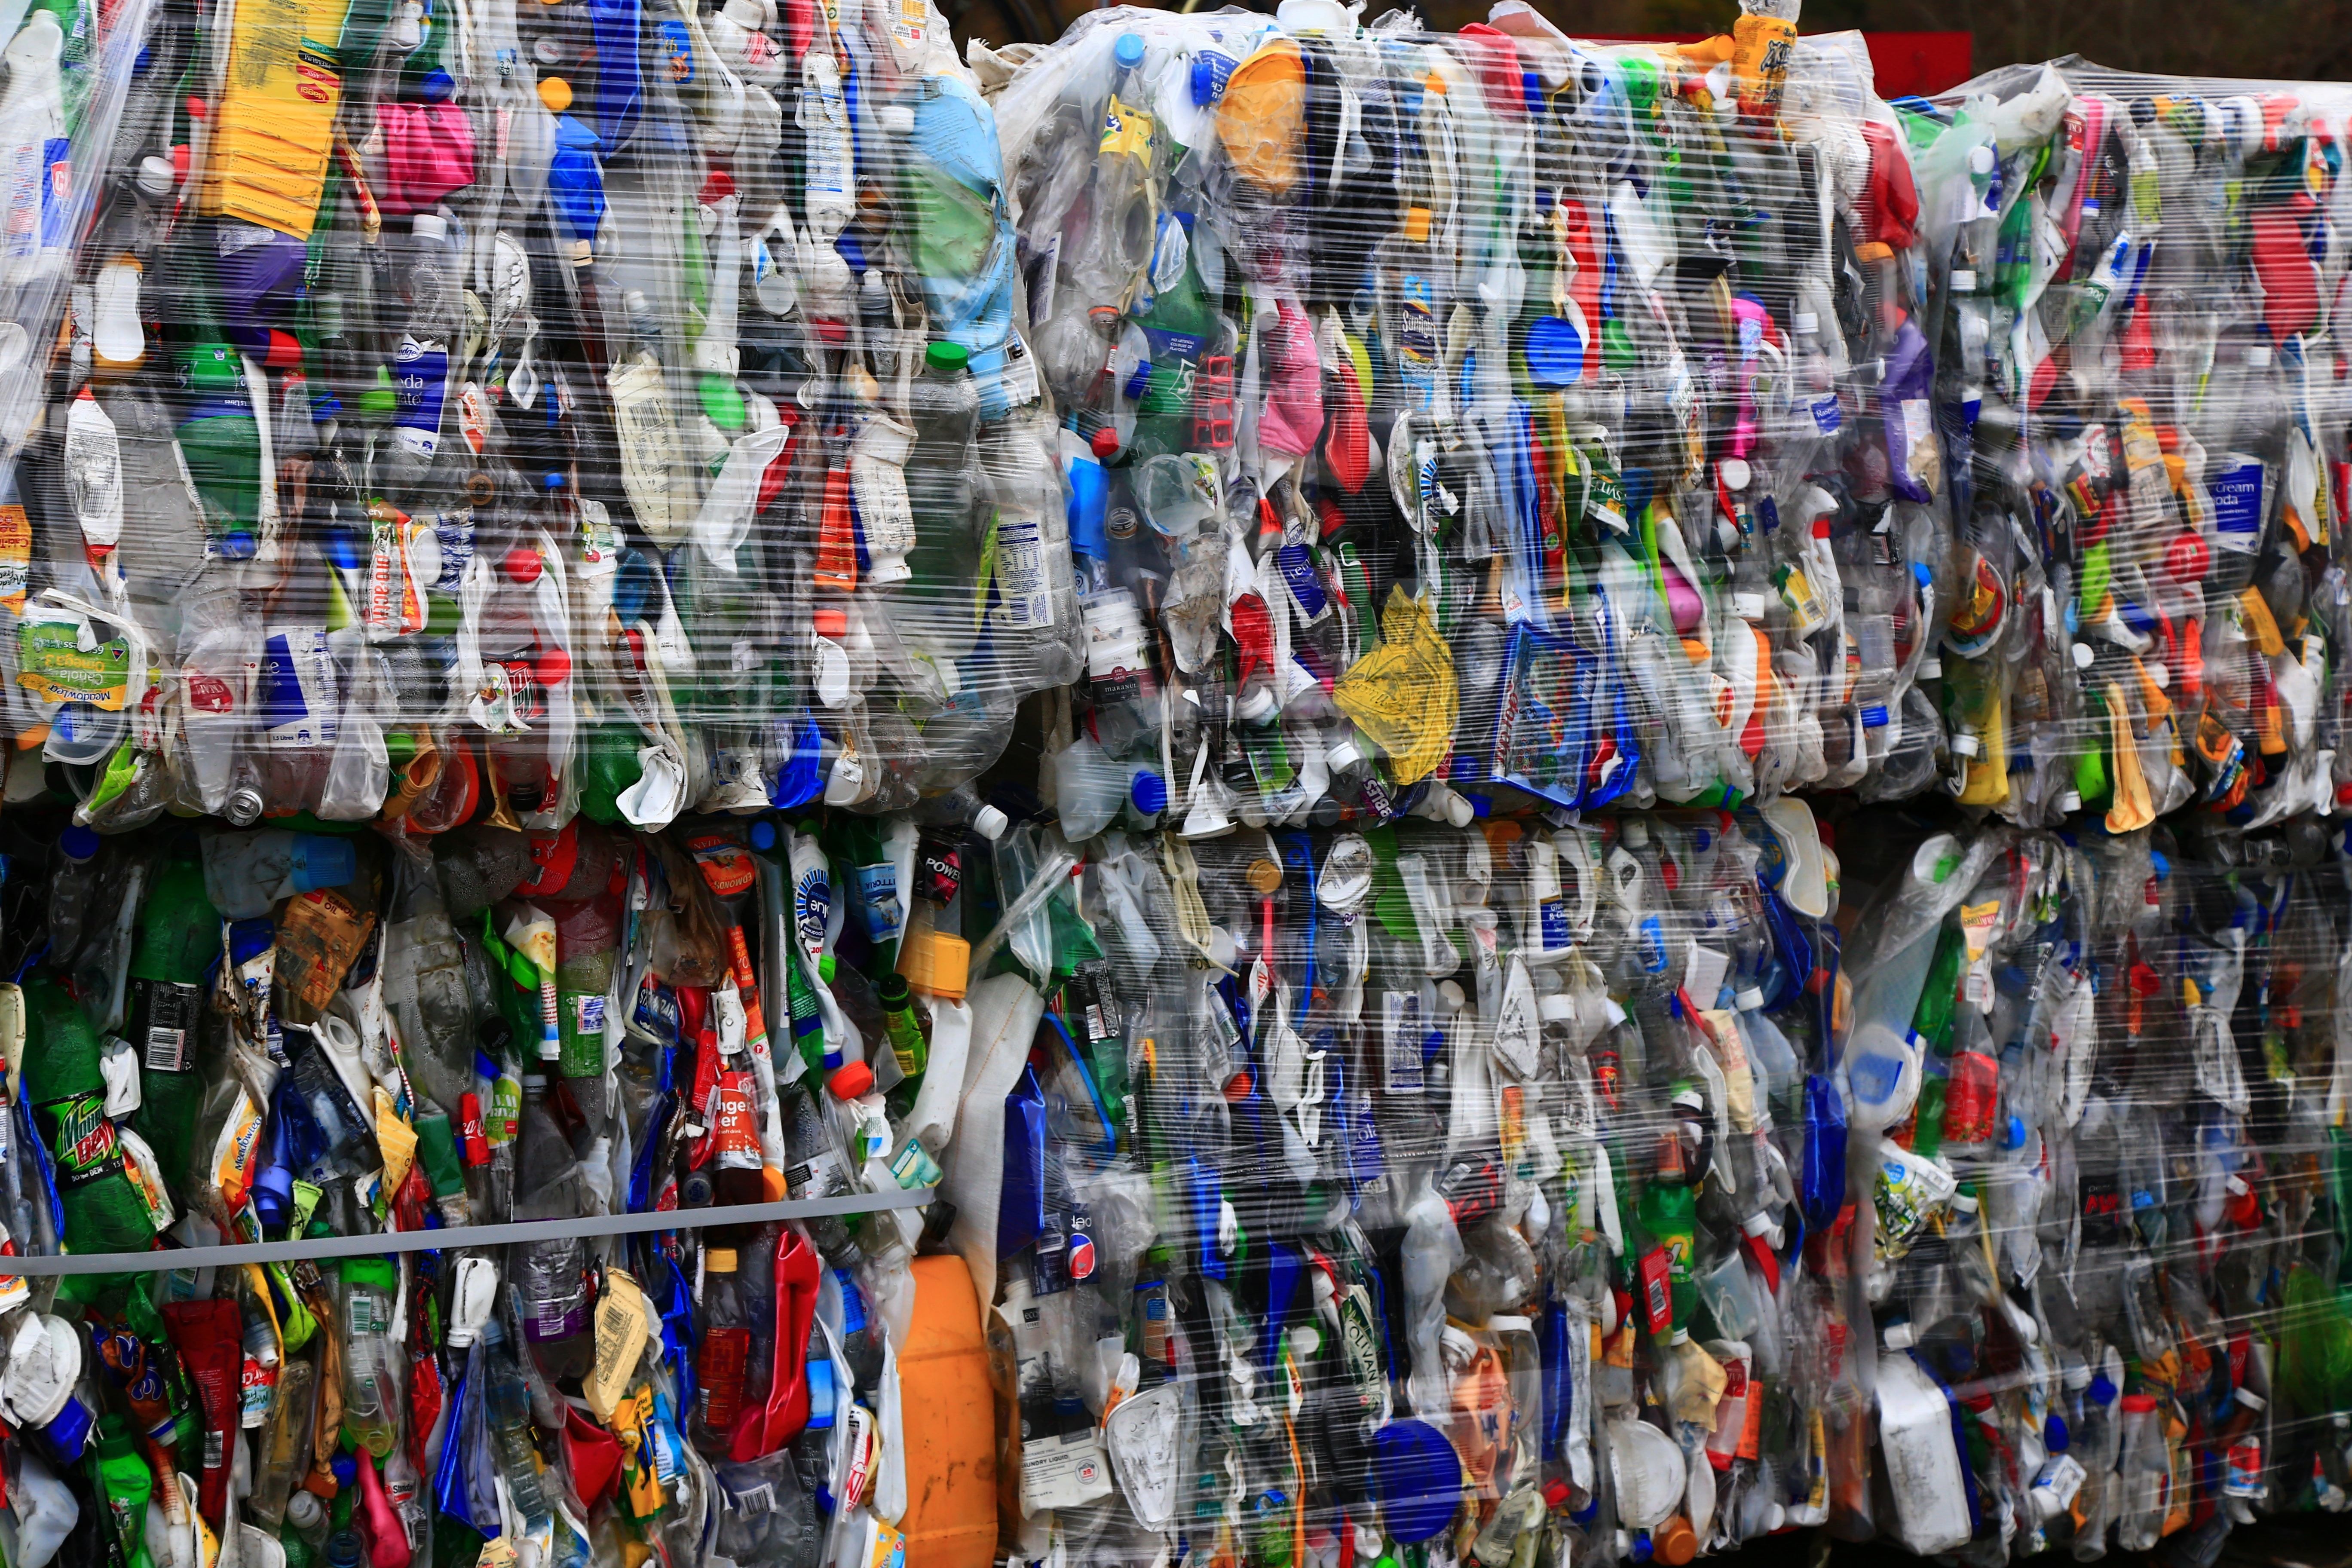 We need to take urgent action to end plastic pollution.